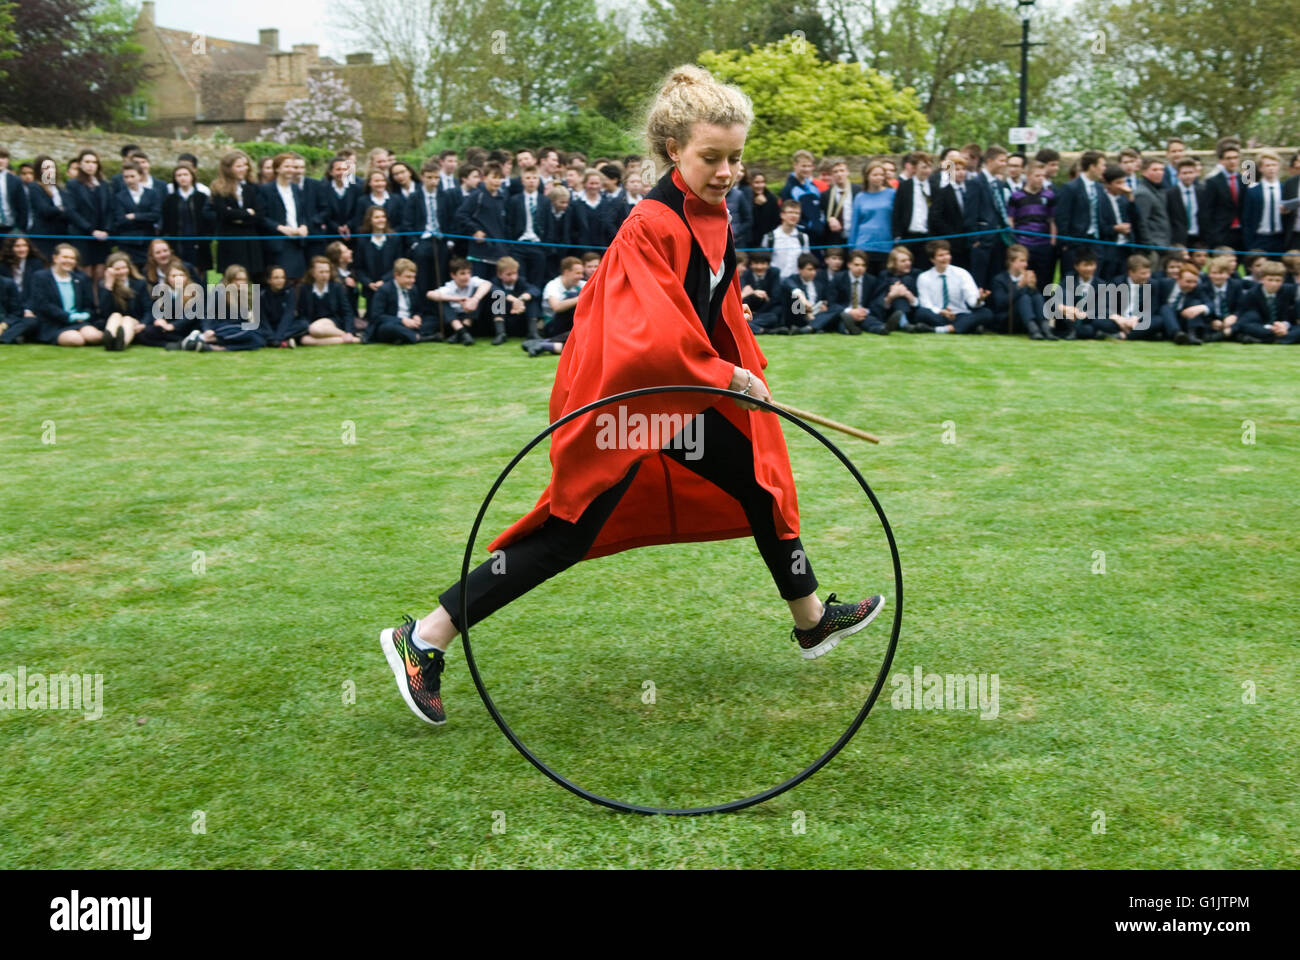 Trundle Hoop. La Kings School Ely. Ely Cathedral Grounds Private Education Inghilterra Regno Unito anni '2016 2010 HOMER SYKES Foto Stock